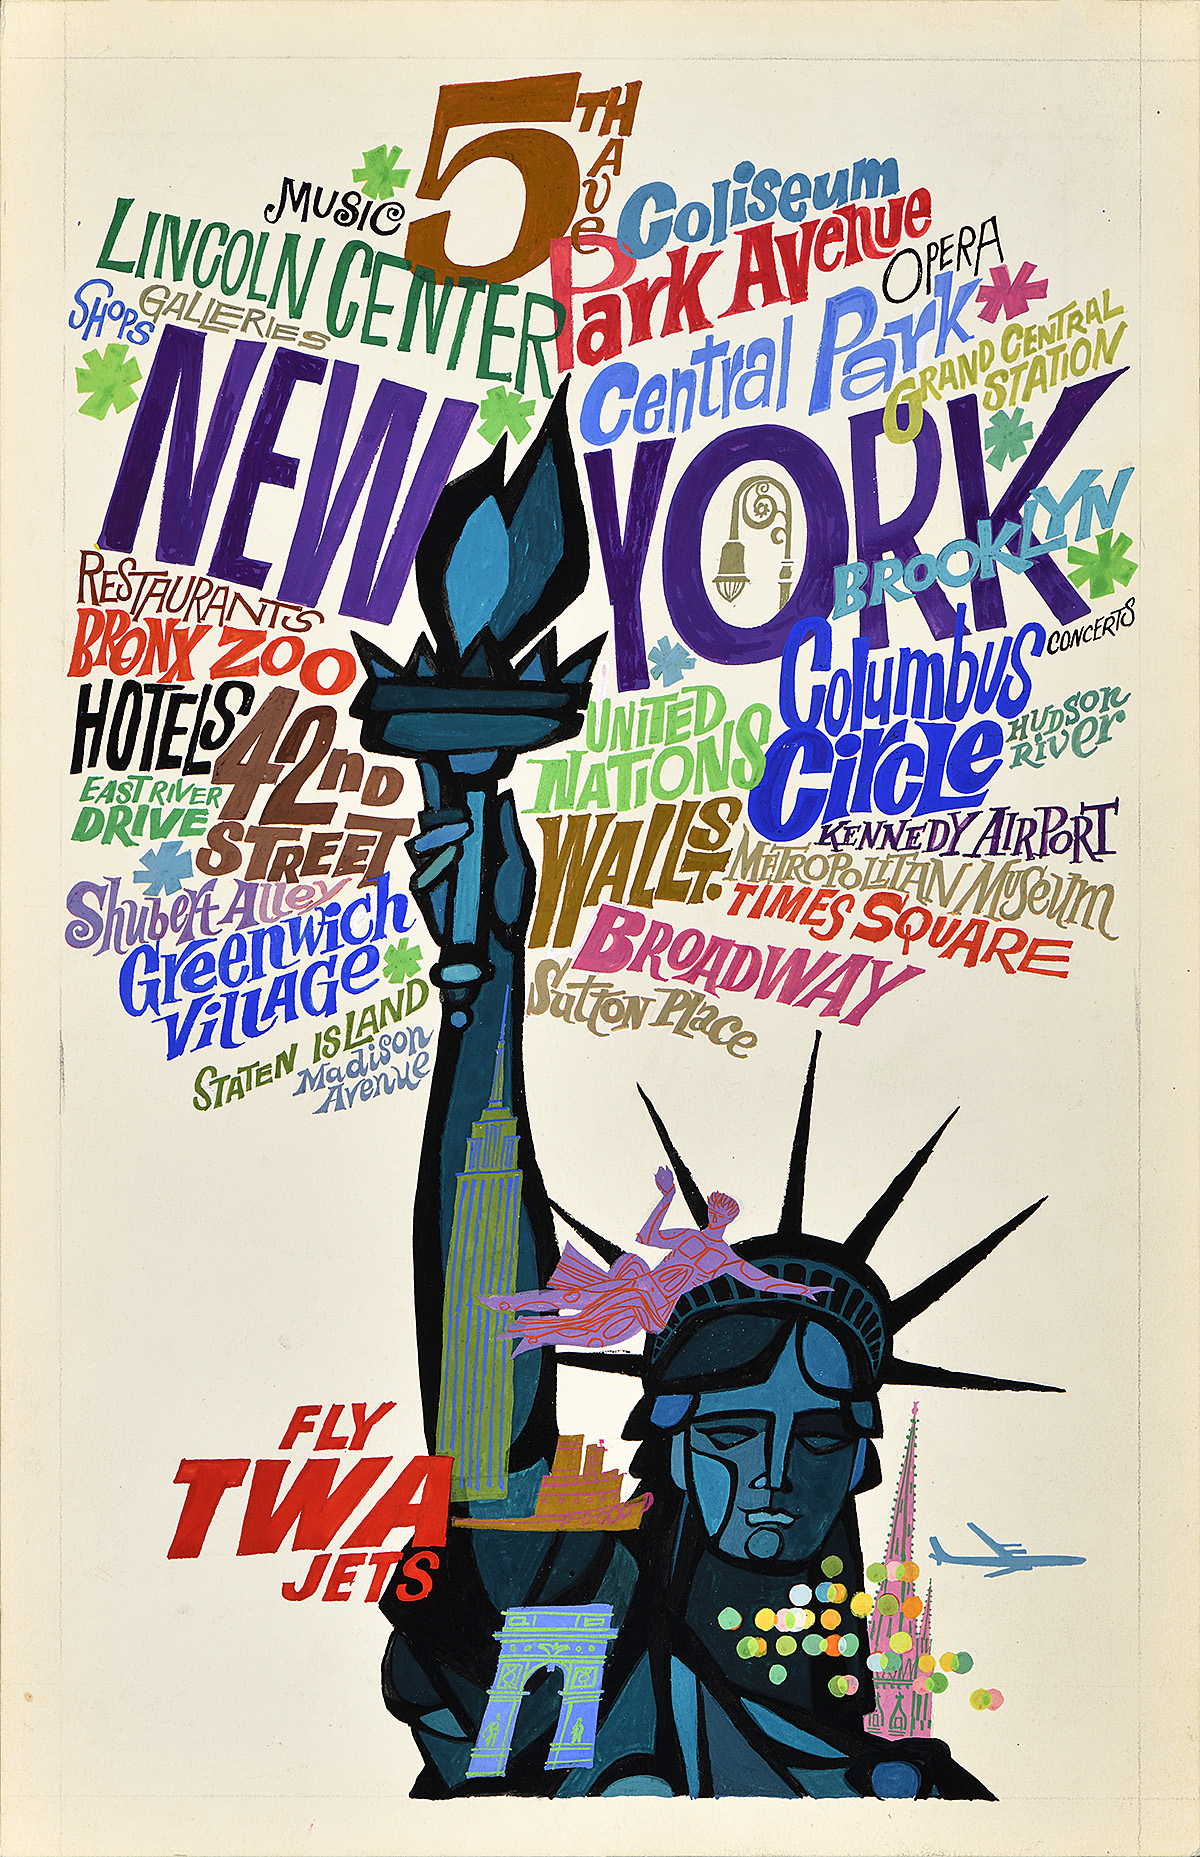 An Exhibition of Travel Posters Traces the Rise of New York